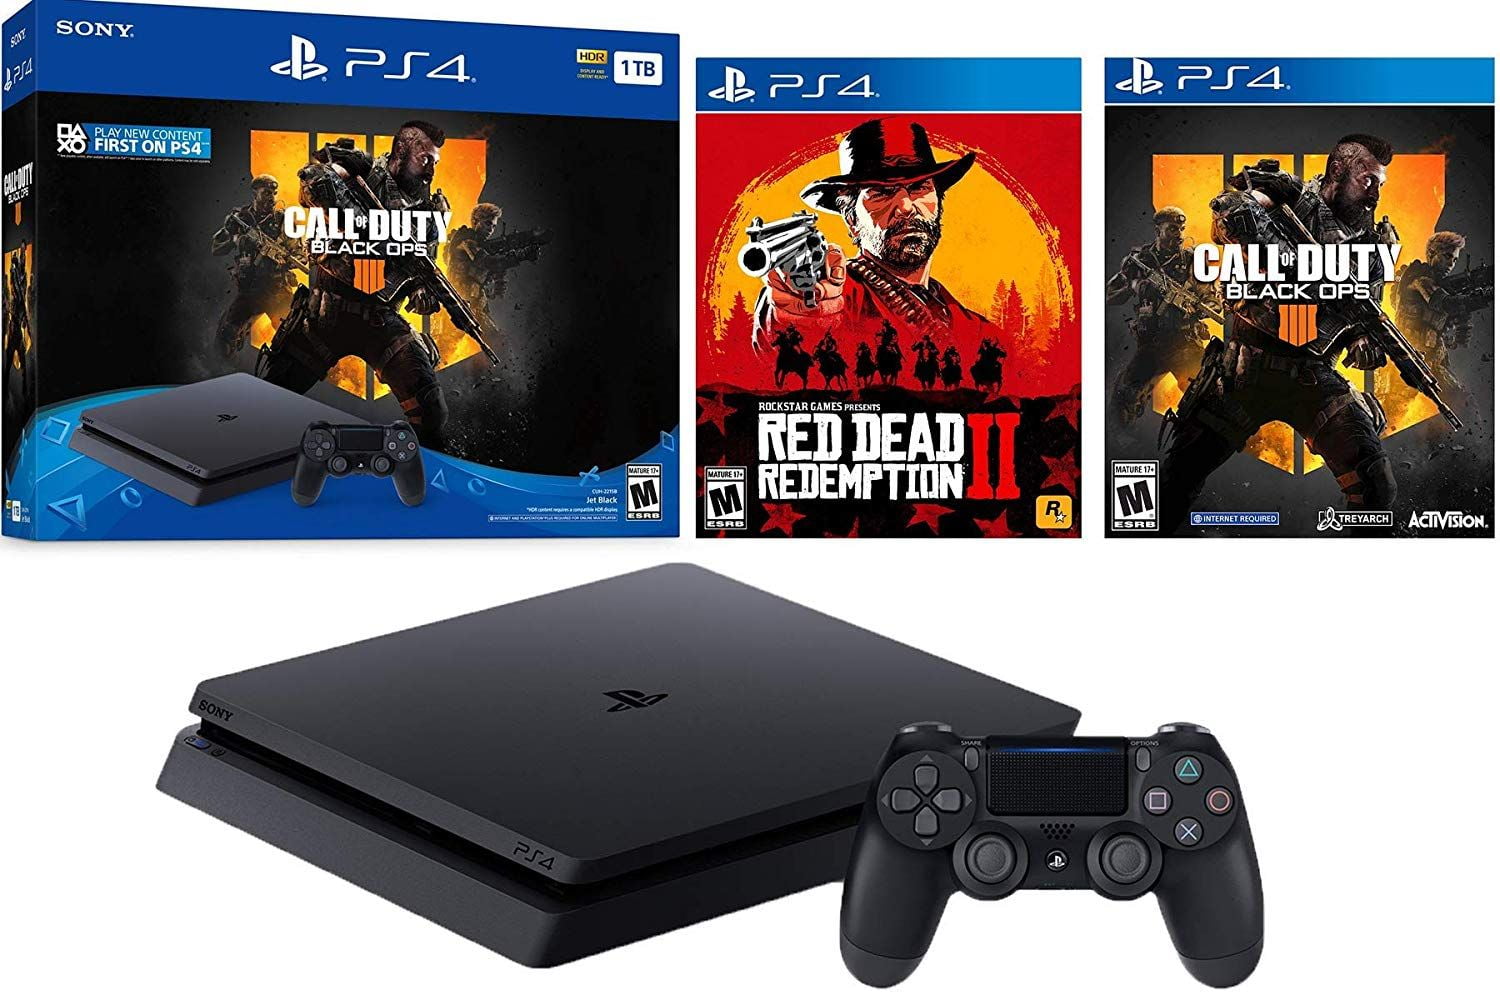 Red redemption 2 купить ps4. Rdr 1 ps4. Sony PLAYSTATION 4 Slim Red Dead Redemption 2. Диск РДР 1 на ПС 4. Sony PLAYSTATION 4 Cod Black ops.